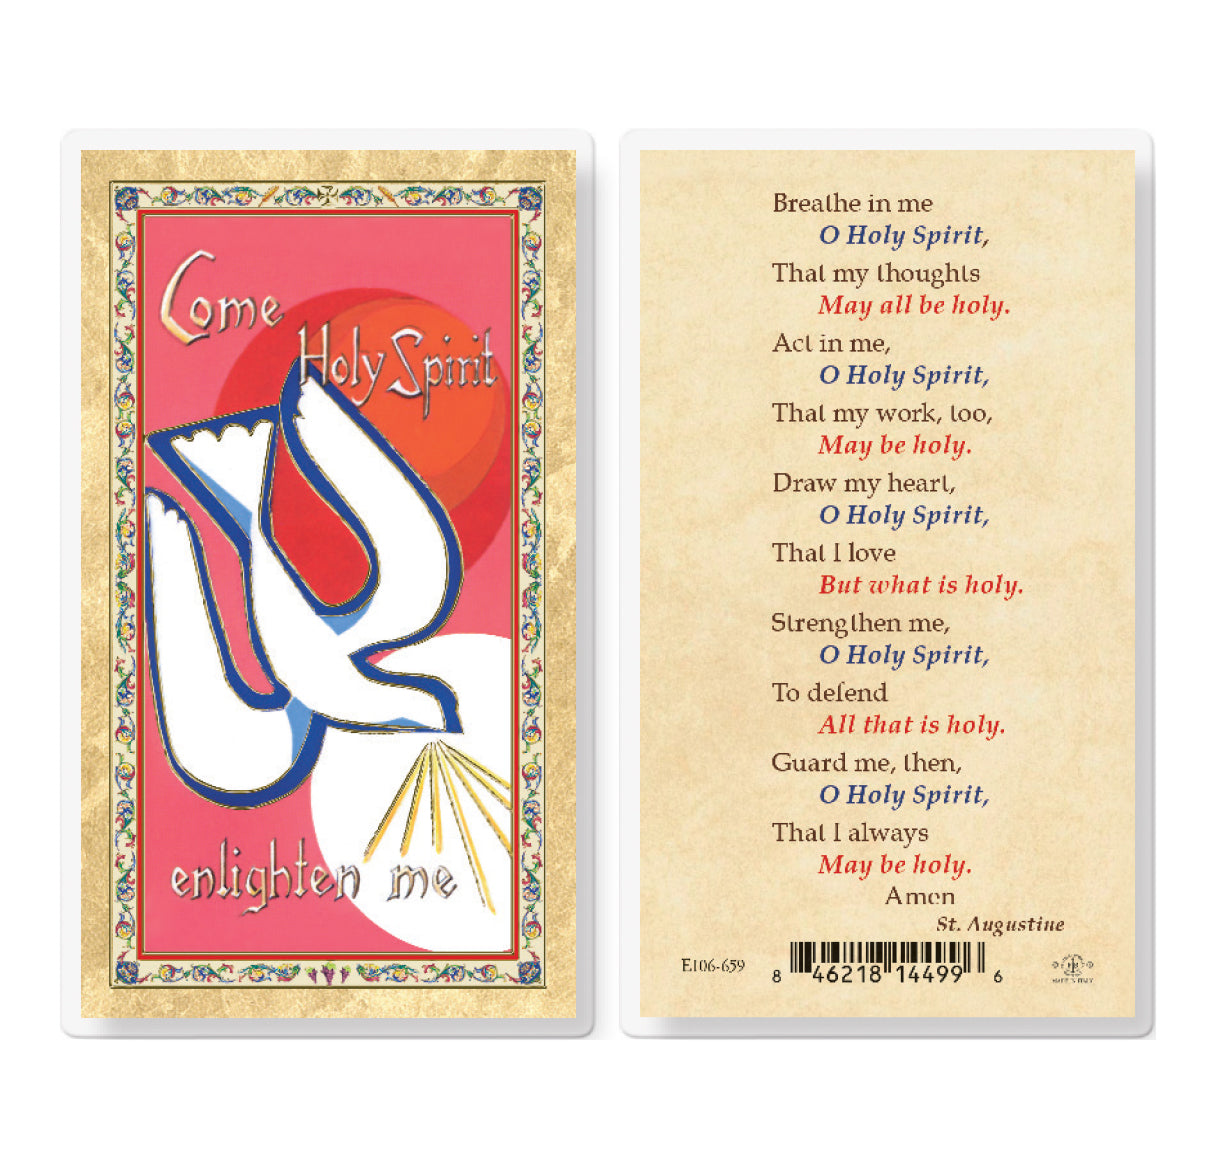 Confirmation - Holy Spirit Breath Gold-Stamped Laminated Catholic Prayer Holy Card with Prayer on Back, Pack of 25